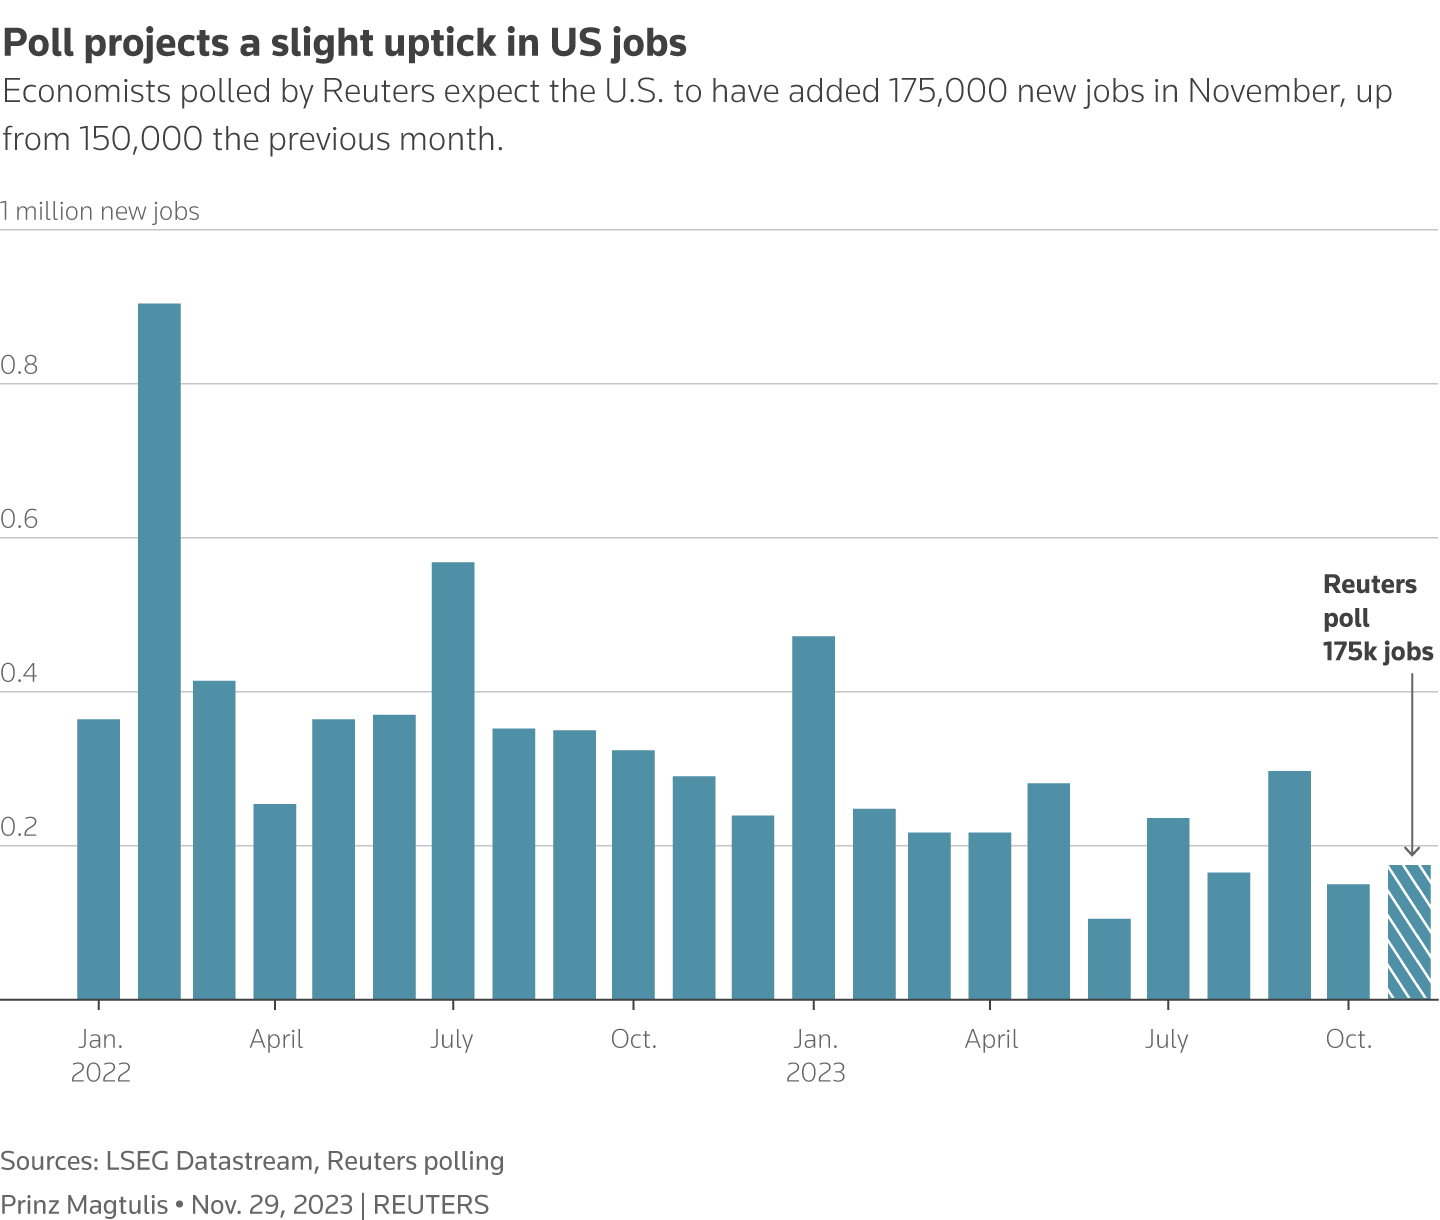 Bar chart with data from LSEG Datastream shows actual U.S. non-farm payrolls from Jan. 2022 to Oct. 2023. A bar with stripes shows a Nov. projection of 175,000 new jobs from a Reuters poll.